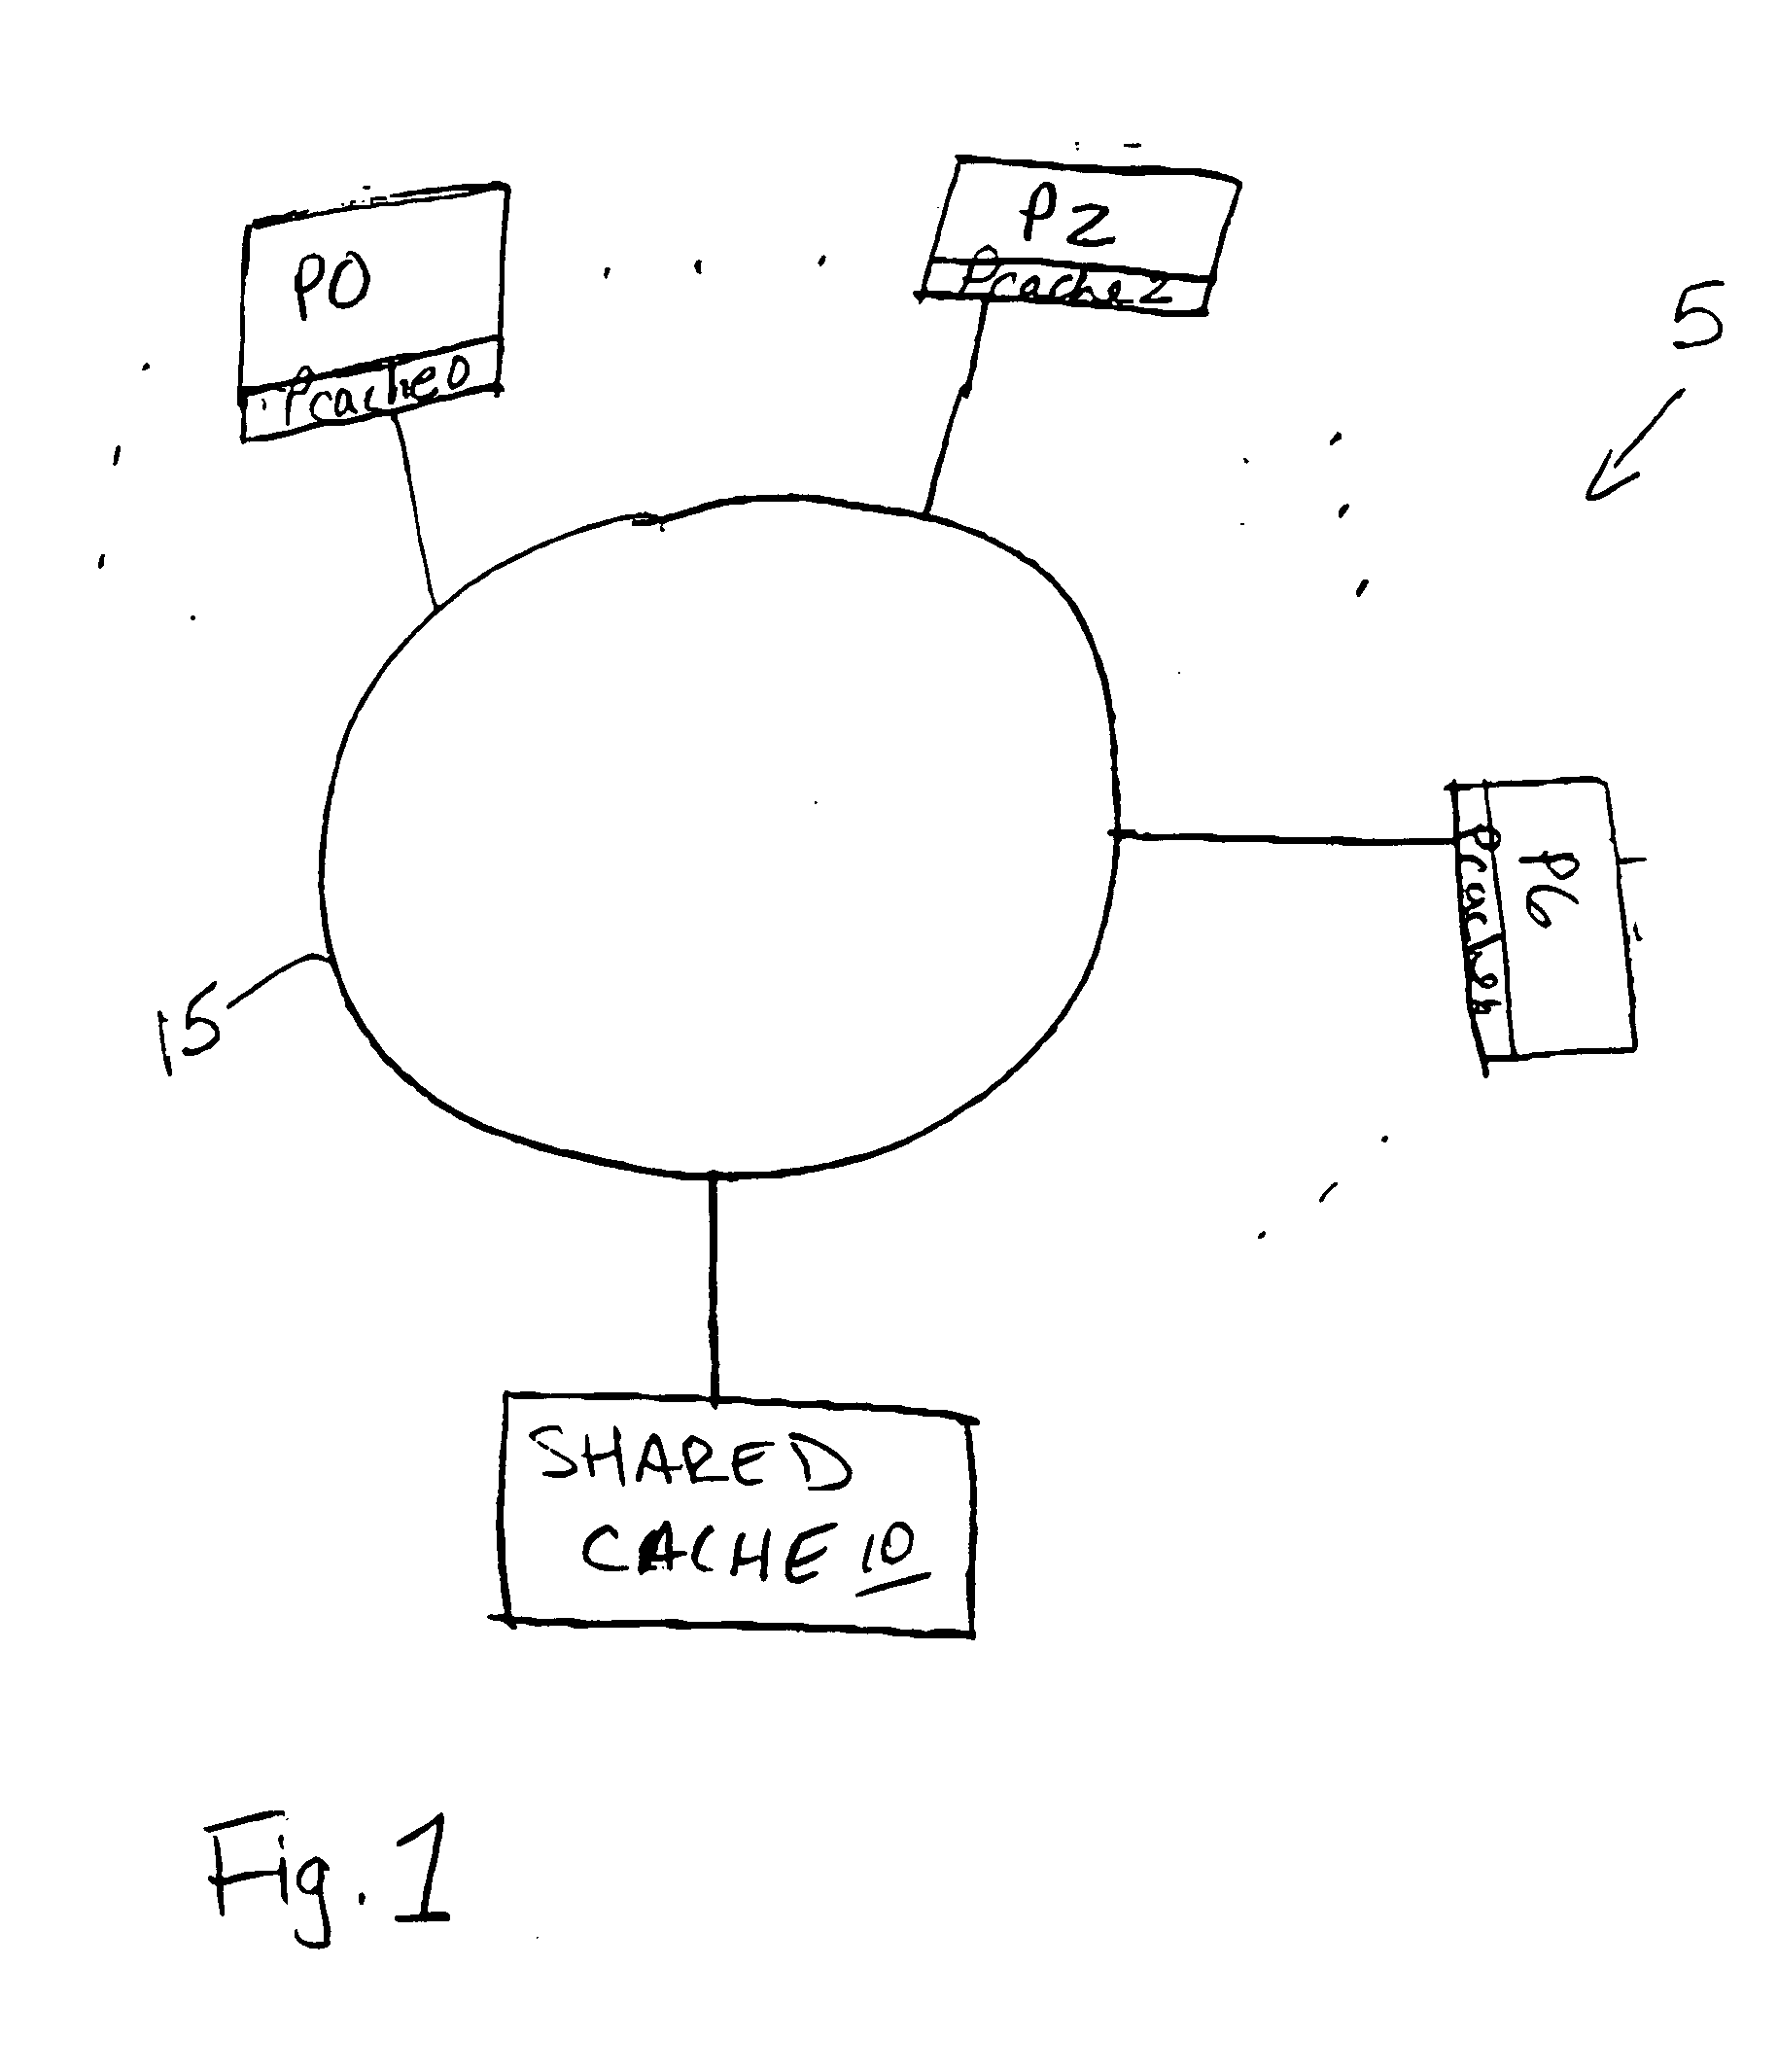 Protocol for maintaining cache coherency in a CMP